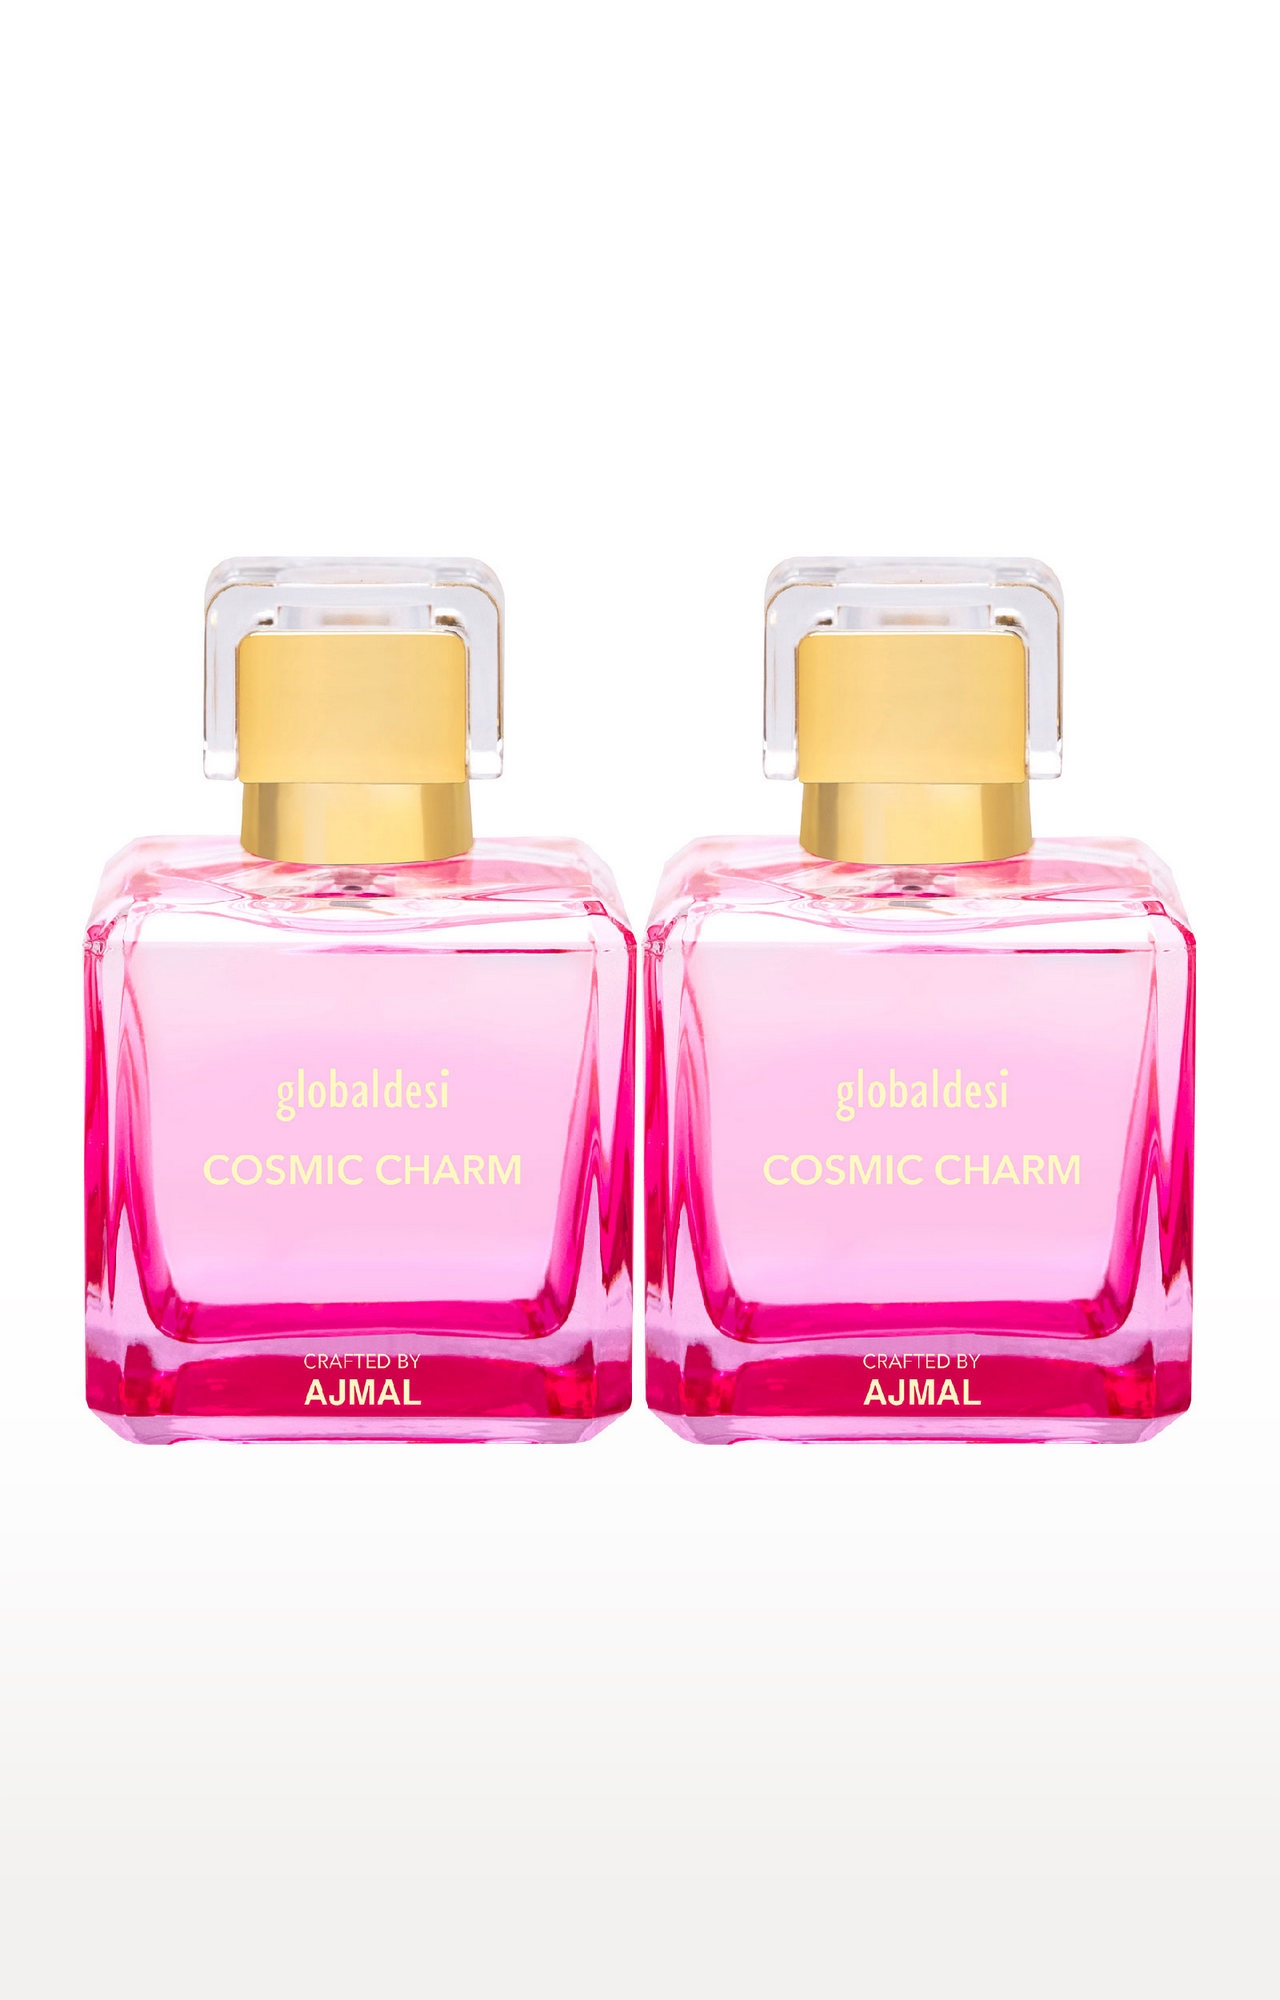 Global Desi Crafted By Ajmal | Global Desi Cosmic Charm Pack of 2 Eau De Parfum 100ML for Women Crafted by Ajmal + 2 Parfum Testers